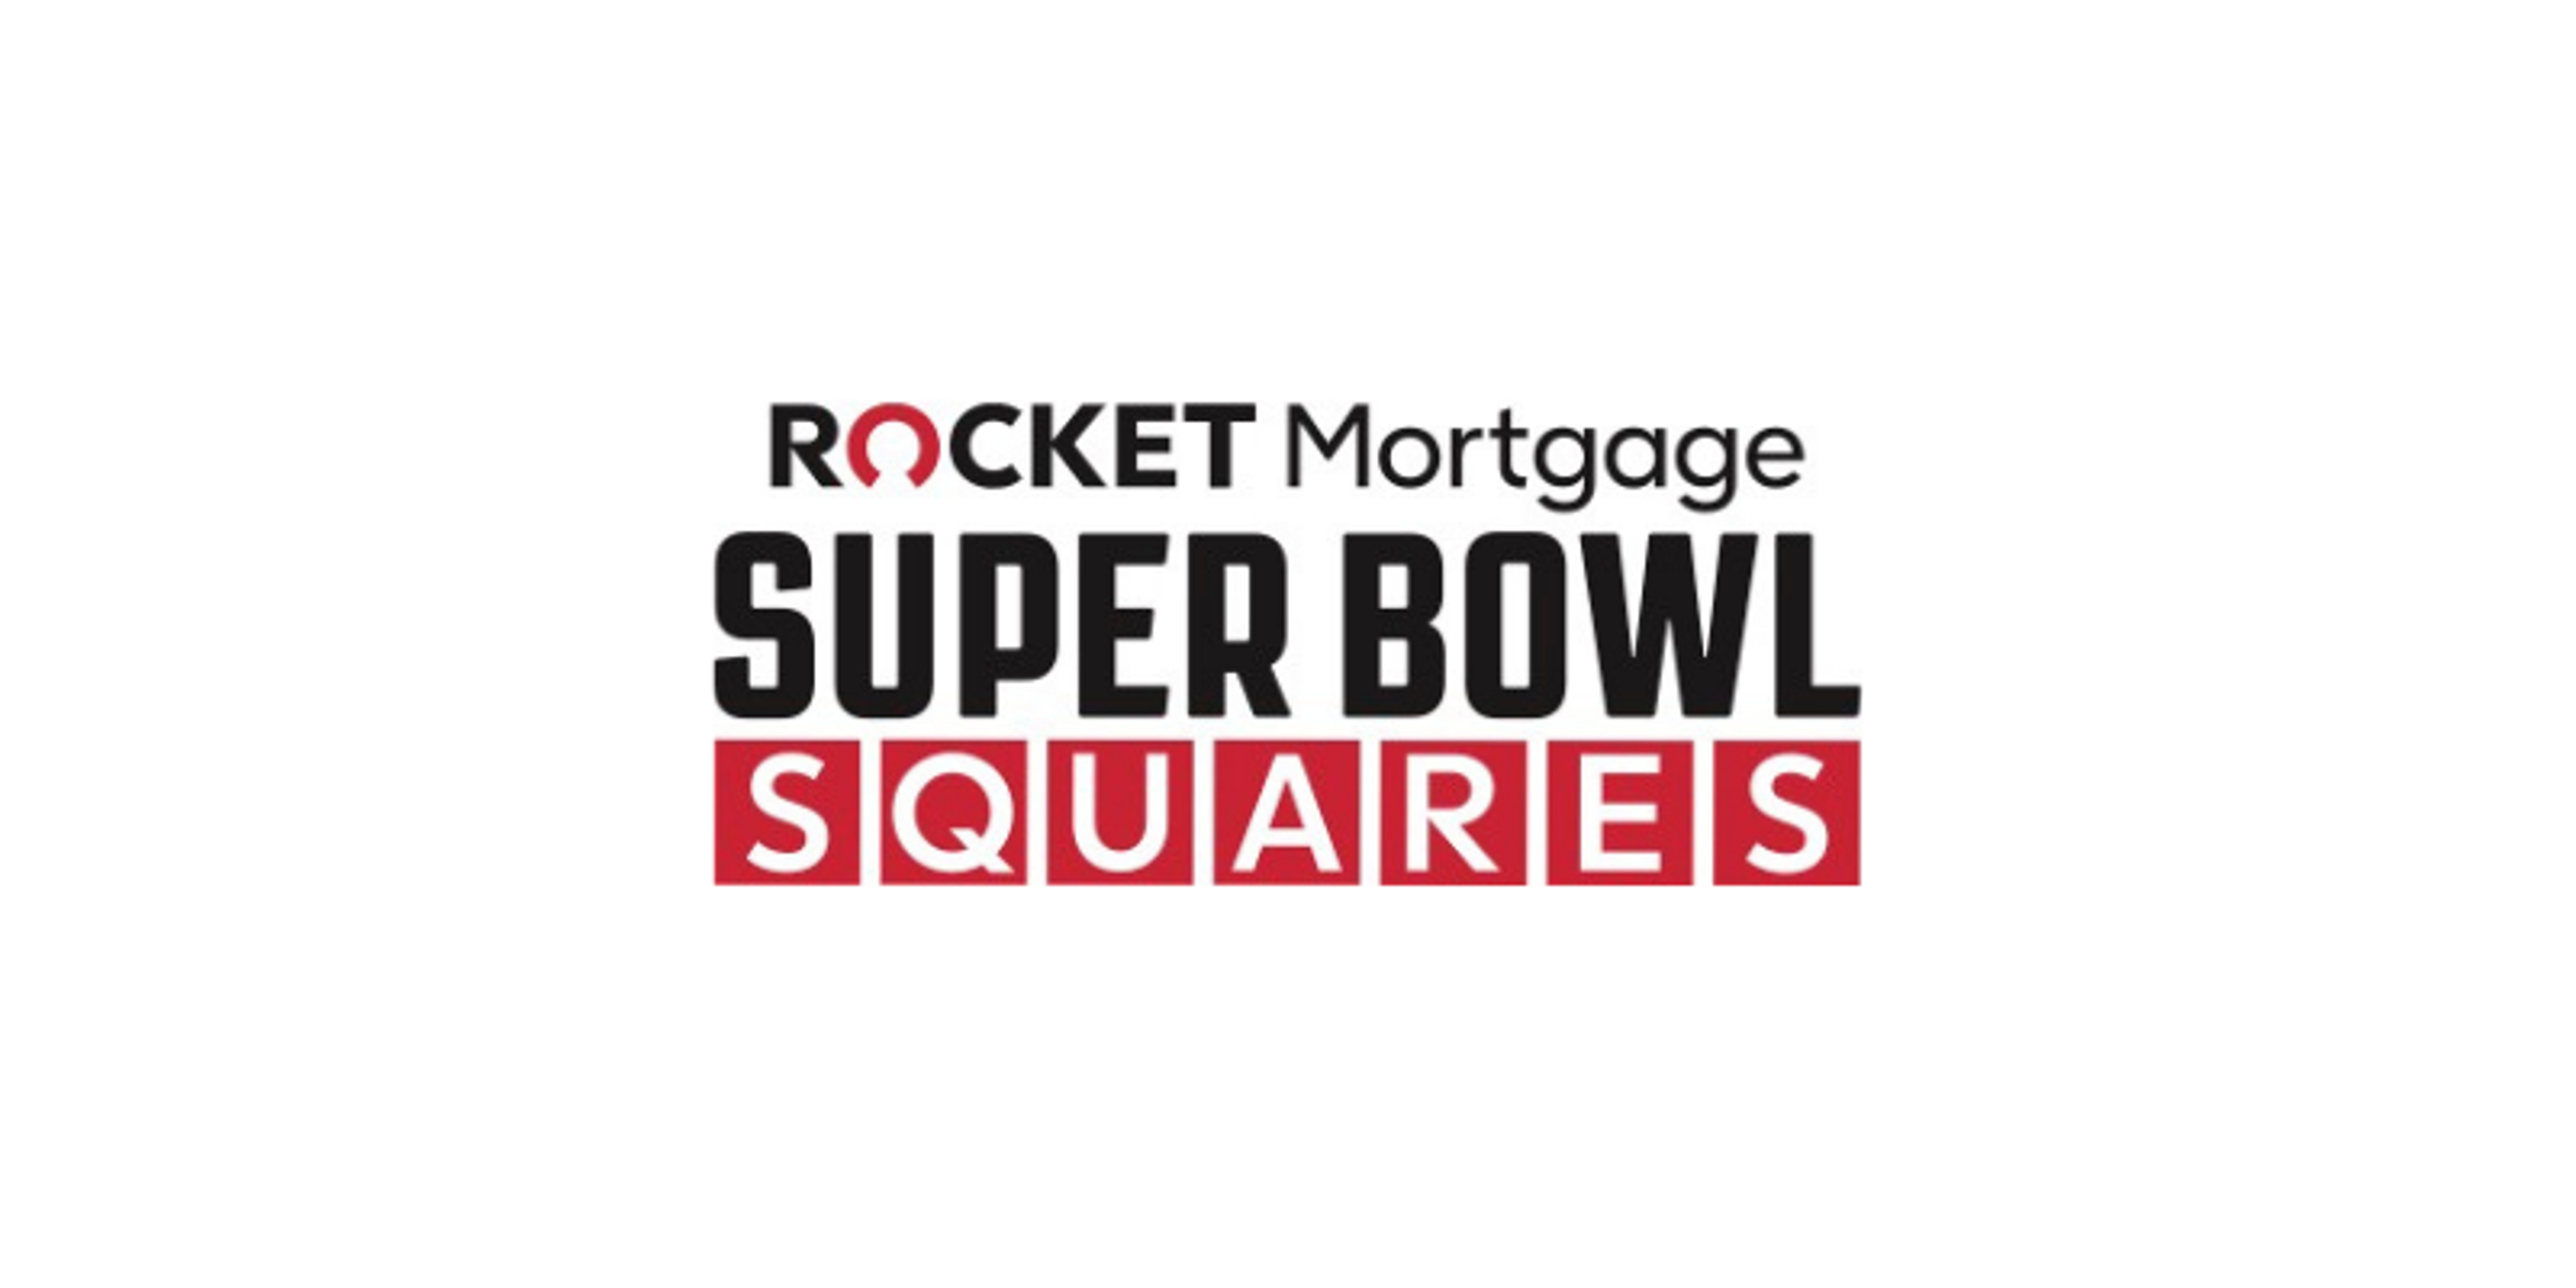 Rocket Mortgage Super Bowl Squares Sweepstakes Returns For A Big Third Year